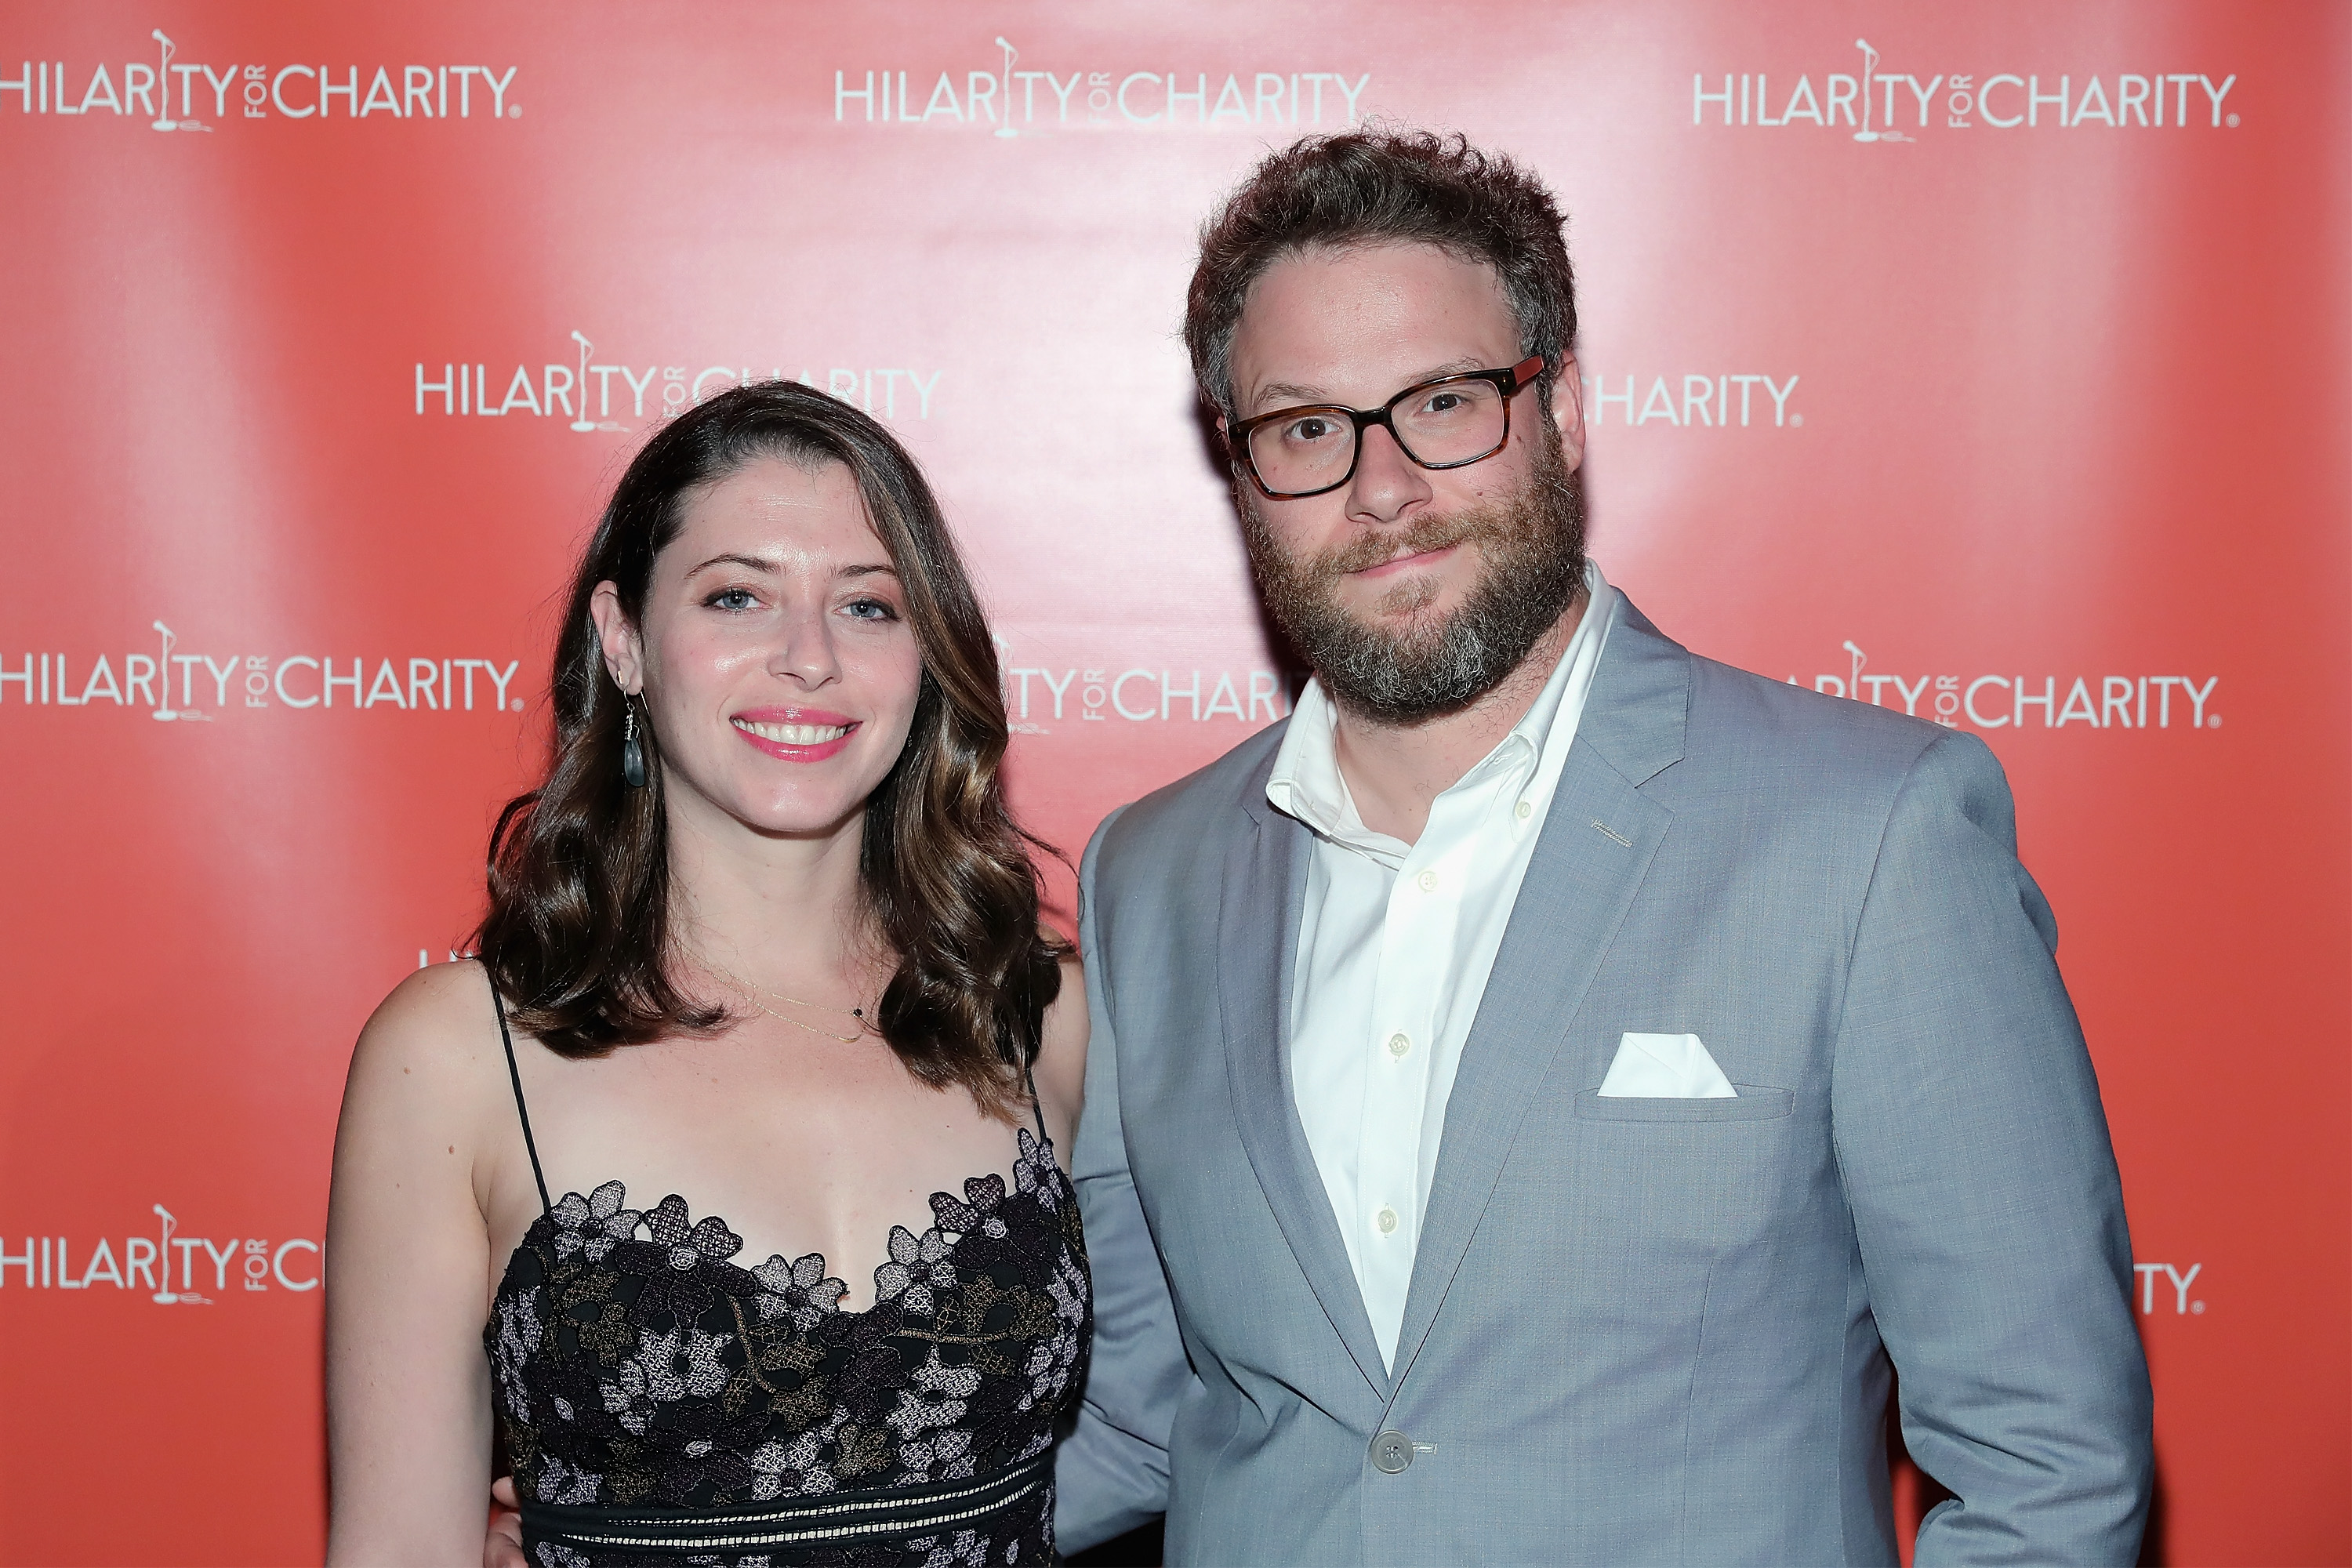 Actors Lauren Miller (L) and Seth Rogen attend HFC NYC presented by Hilarity for Charity at Highline Ballroom on June 29, 2016 in New York City. (Neilson Barnard&mdash;Getty Images for Hilarity For Charity)